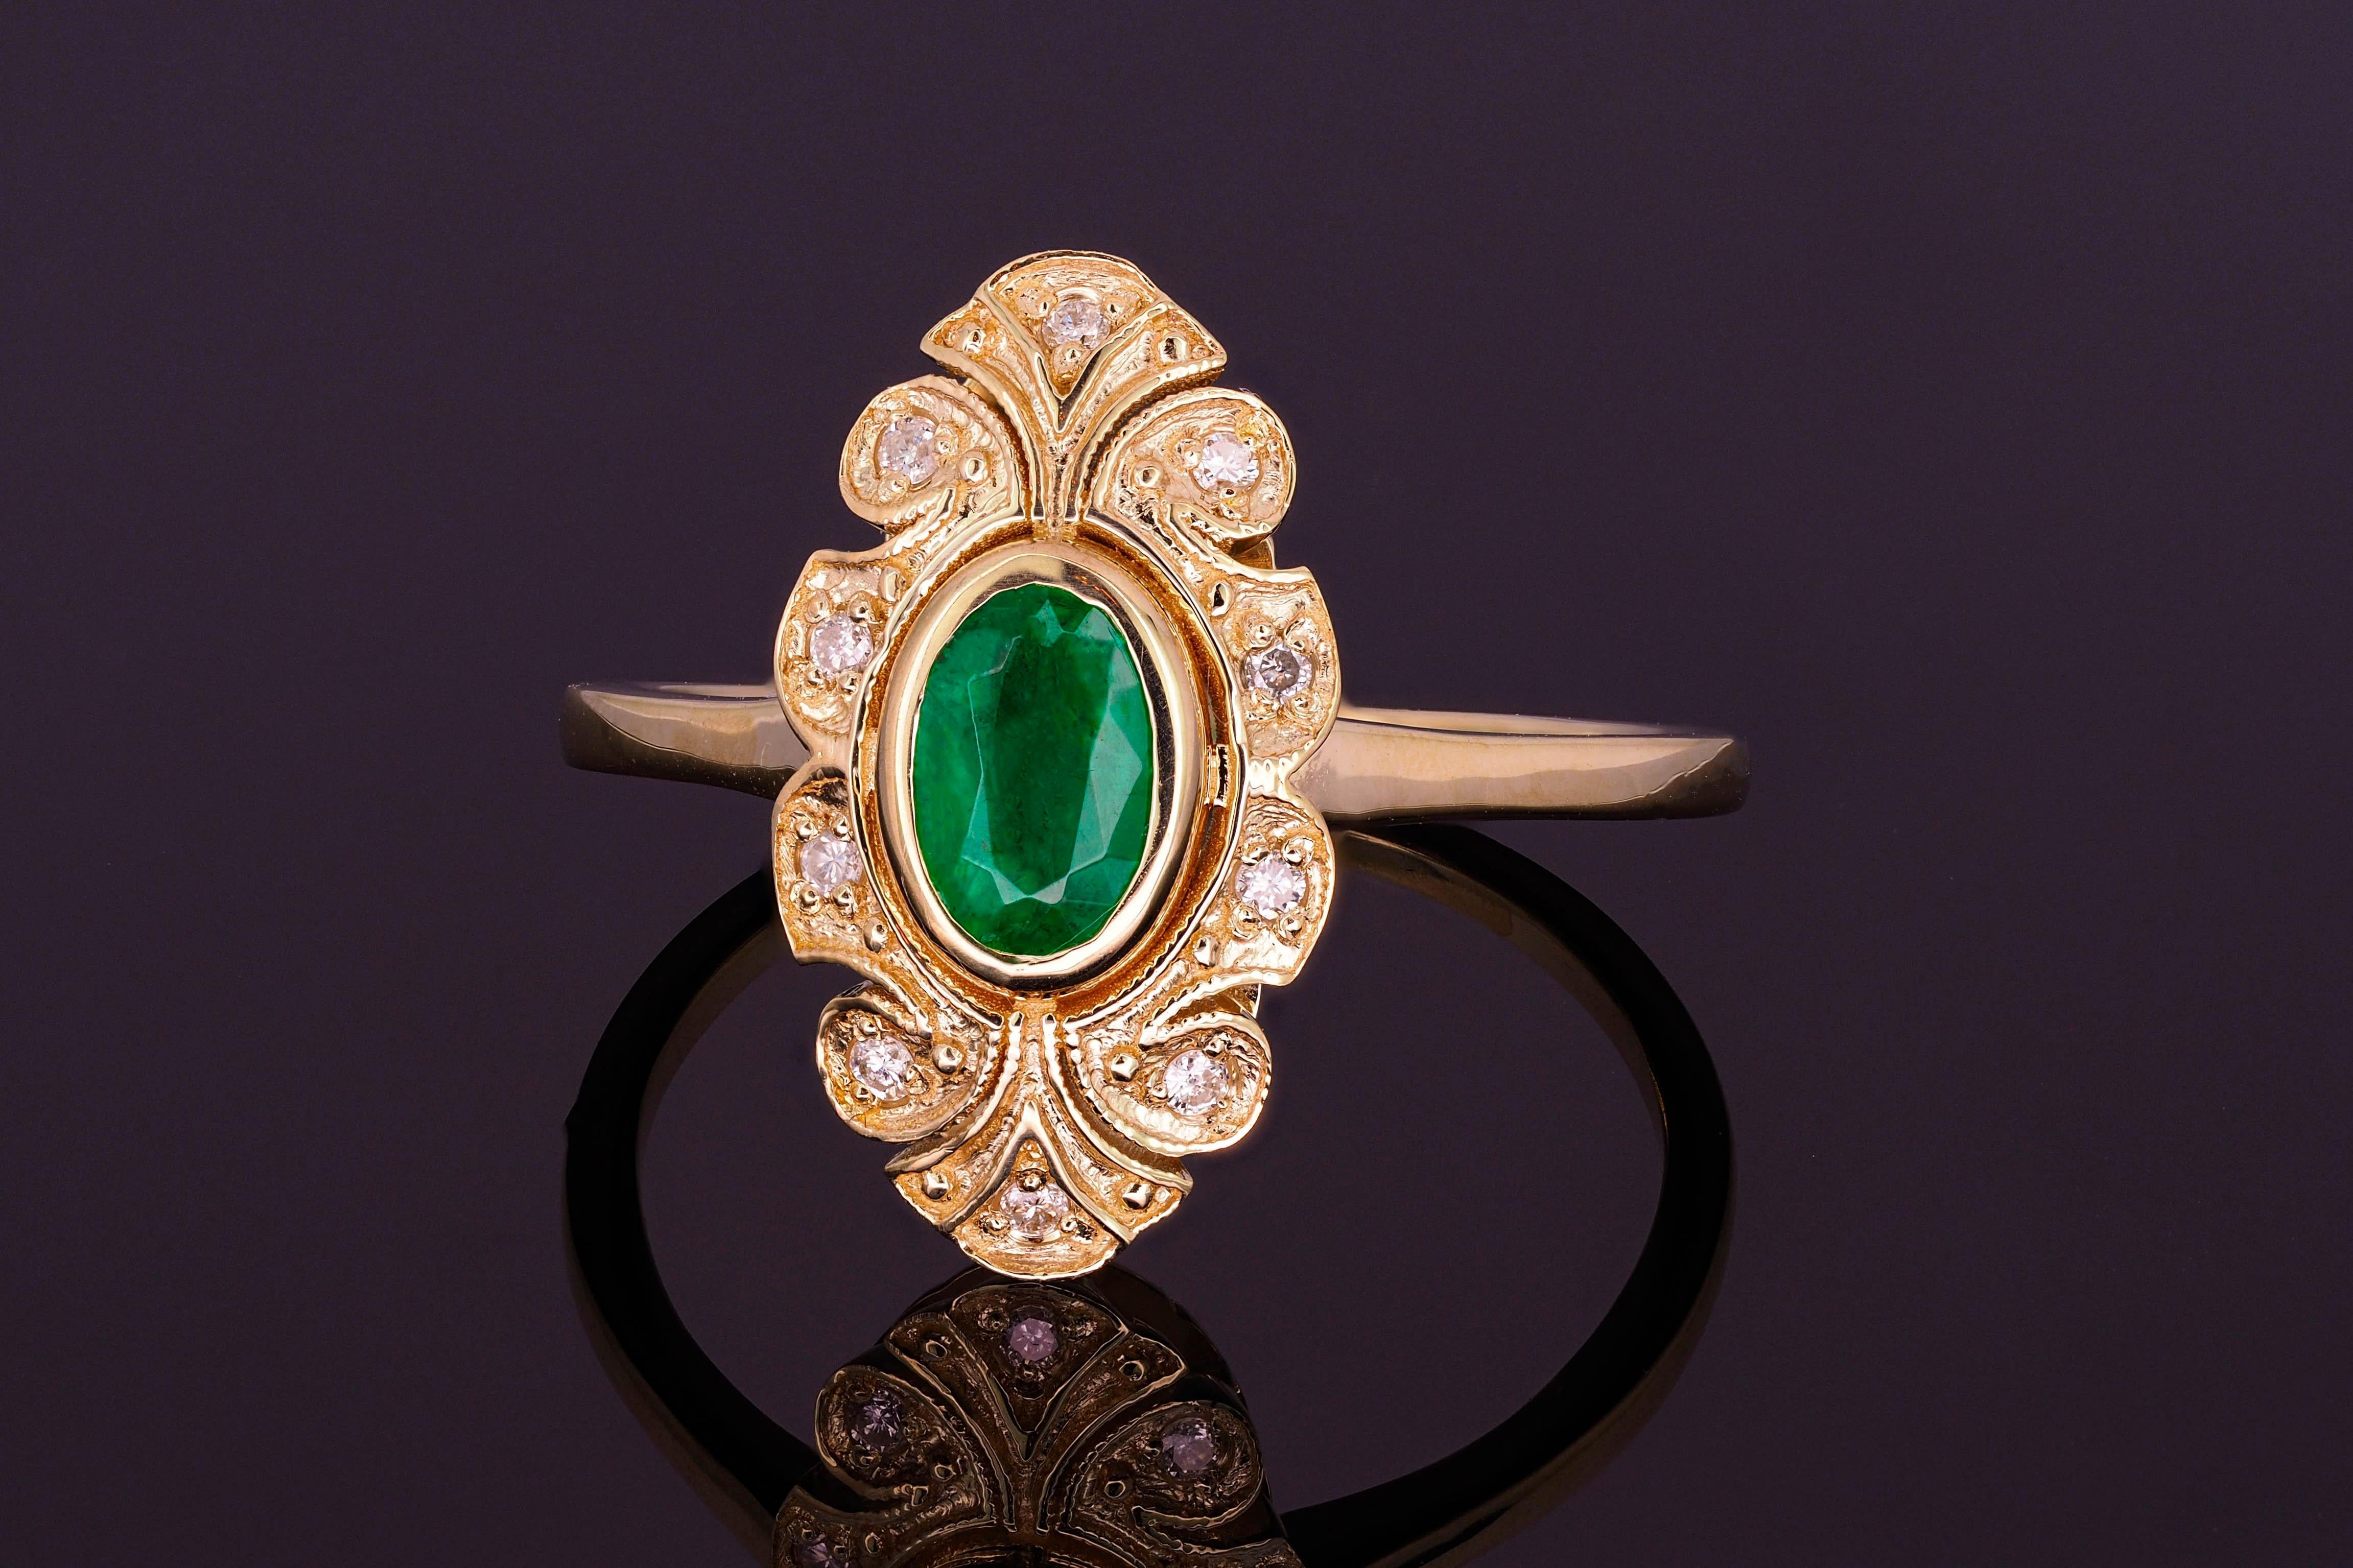 For Sale:  14k Gold Ring with Oval Emerald and Diamonds, Vintage Inspired Ring 5